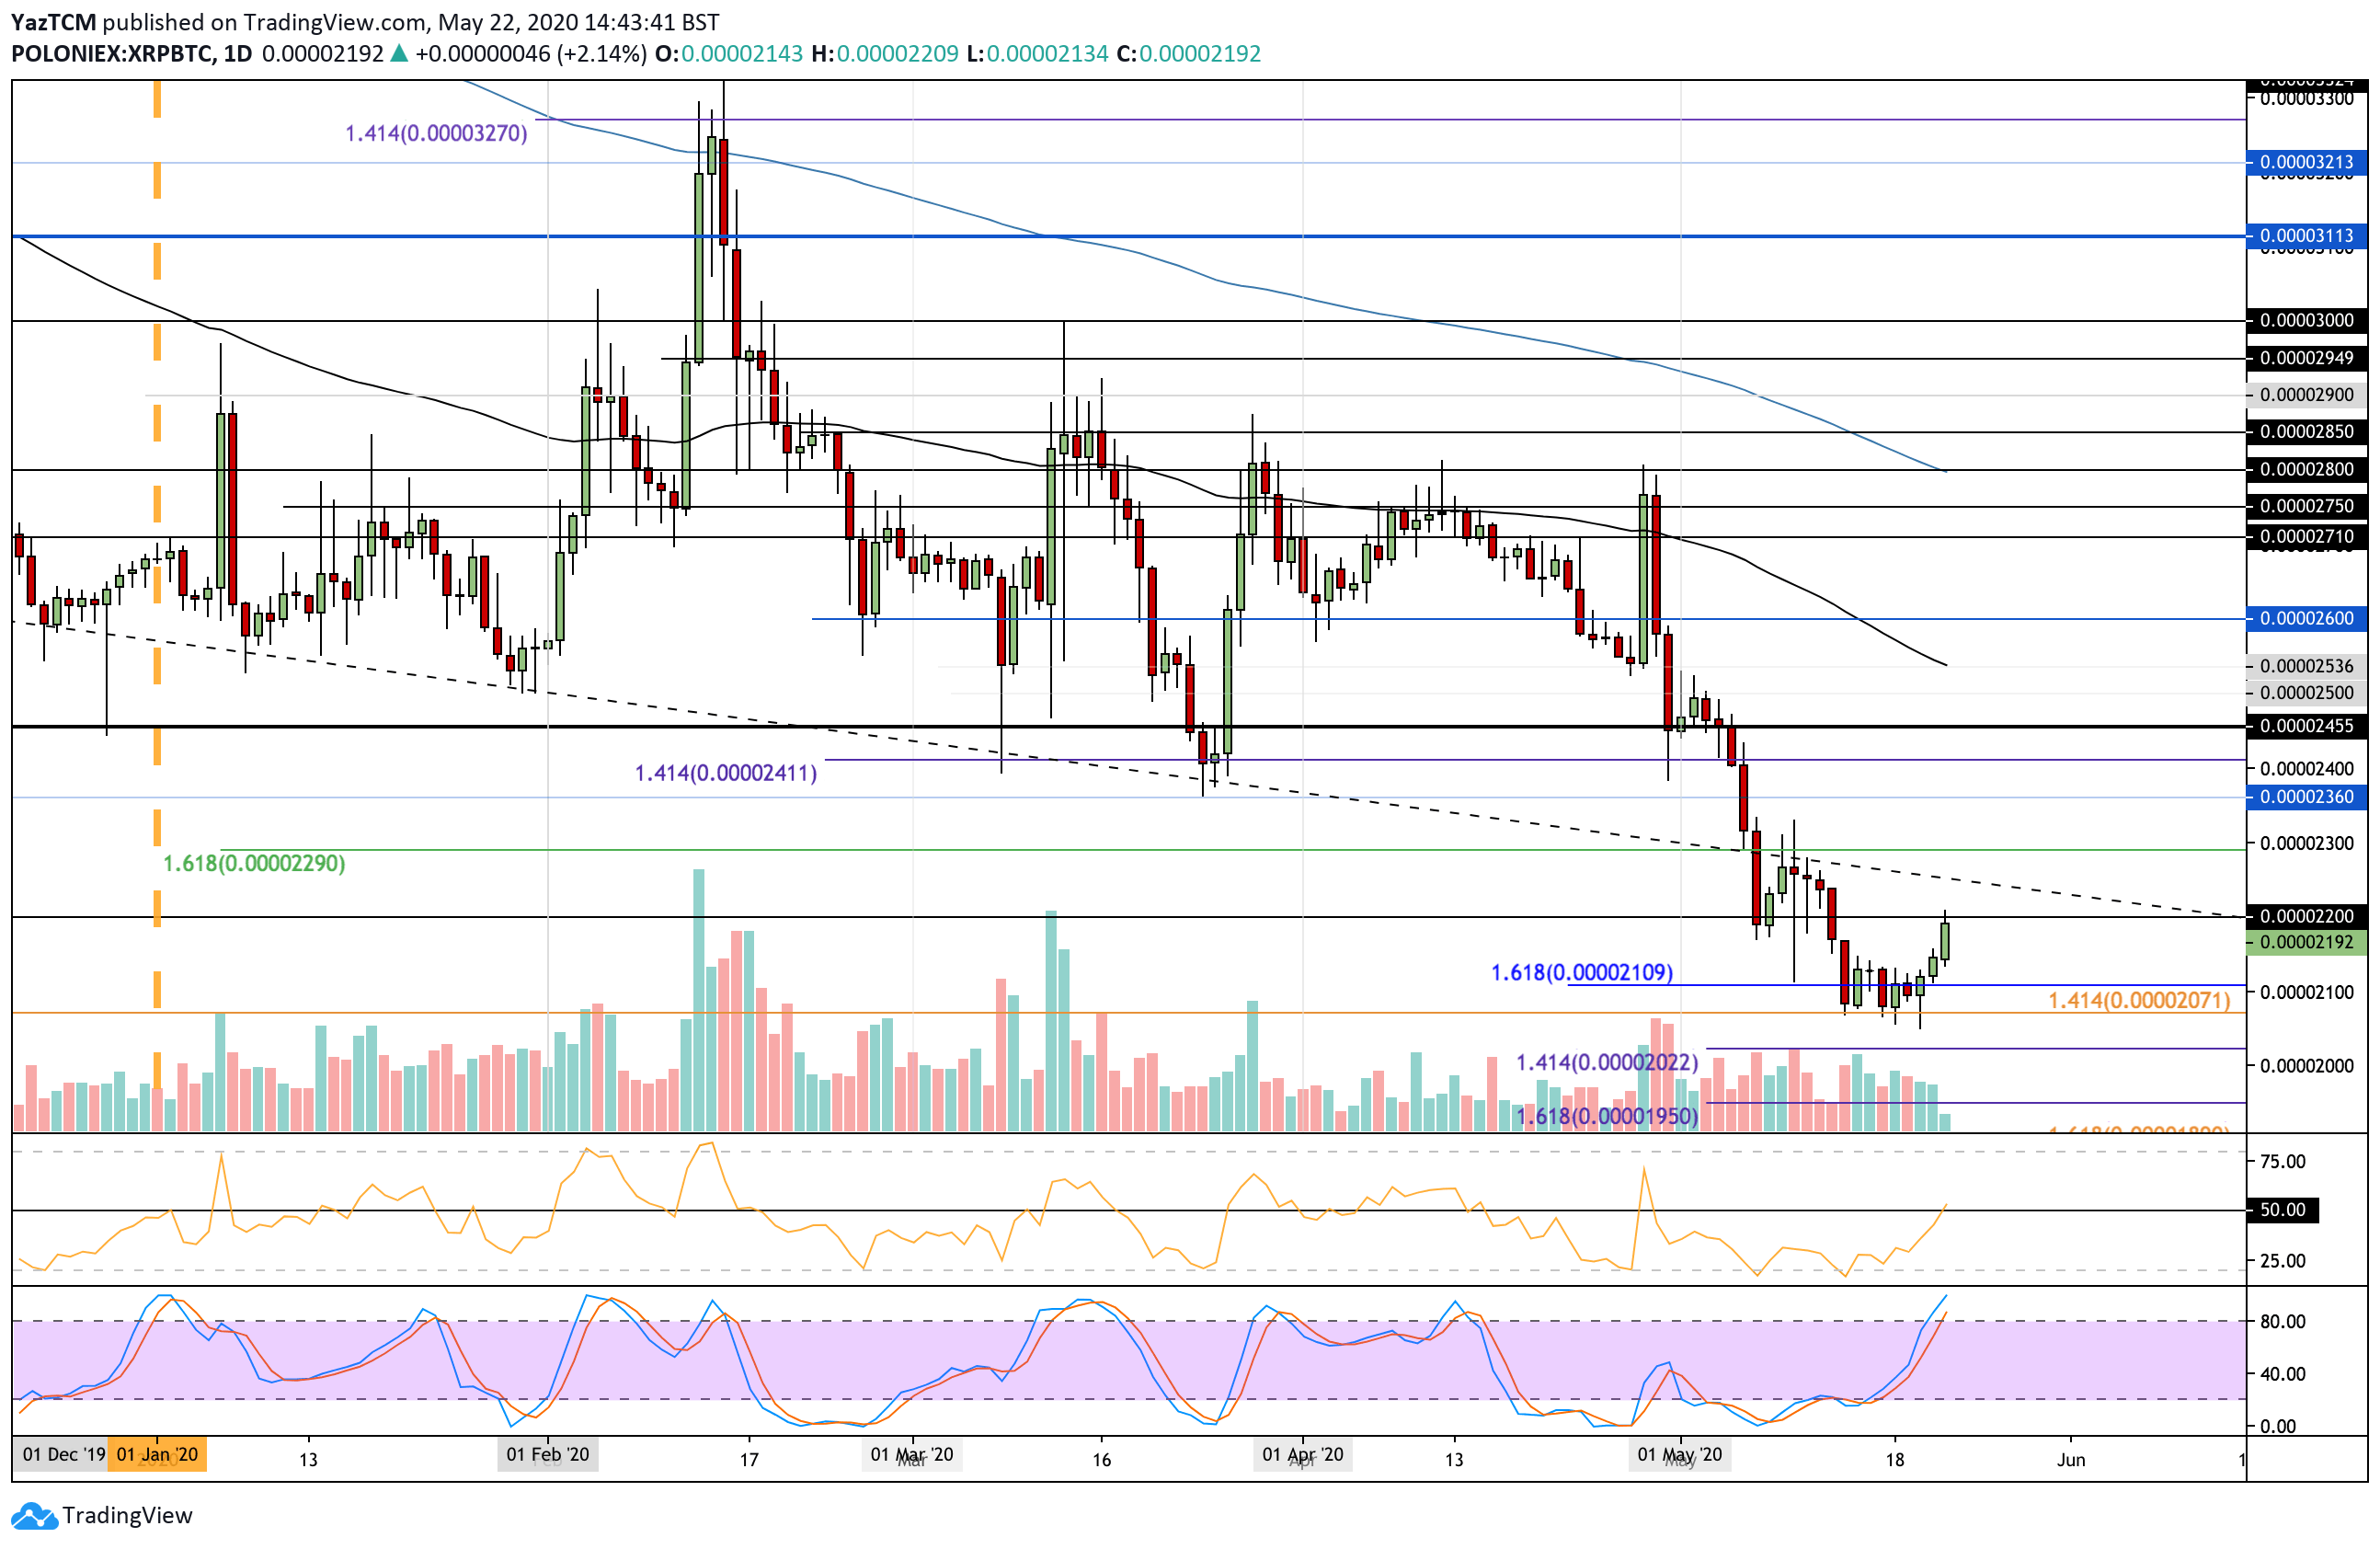 Crypto Price Analysis & Overview May 22nd: Bitcoin, Ethereum, Ripple, Cardano, and TFuel